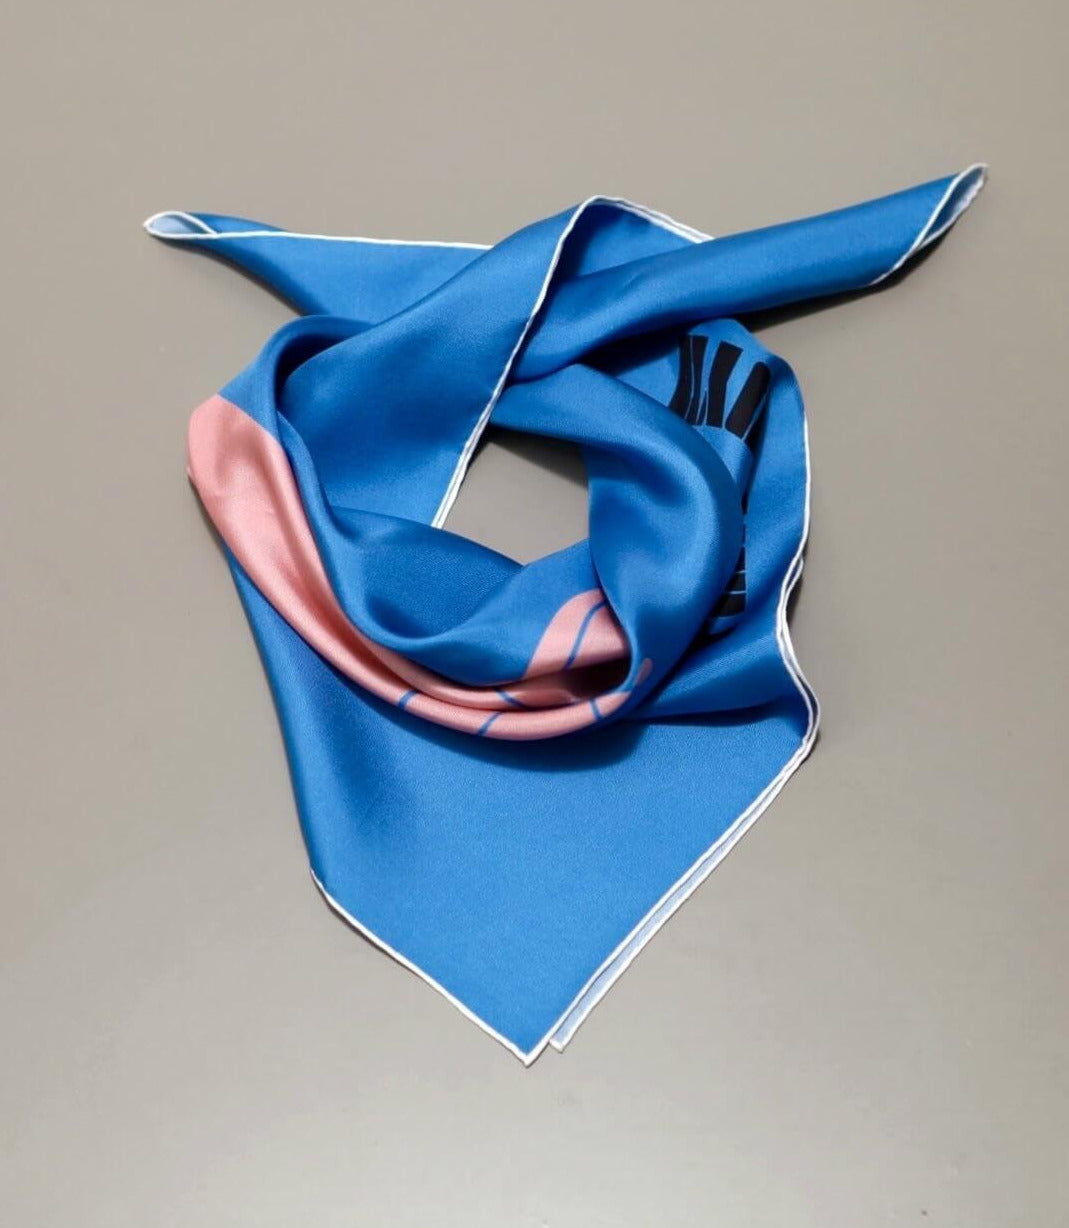 Pink Floyd limited edition silk scarf, made especially for Pink Floyd's Mortal Remains Exhibition by Robe de Voyage. 